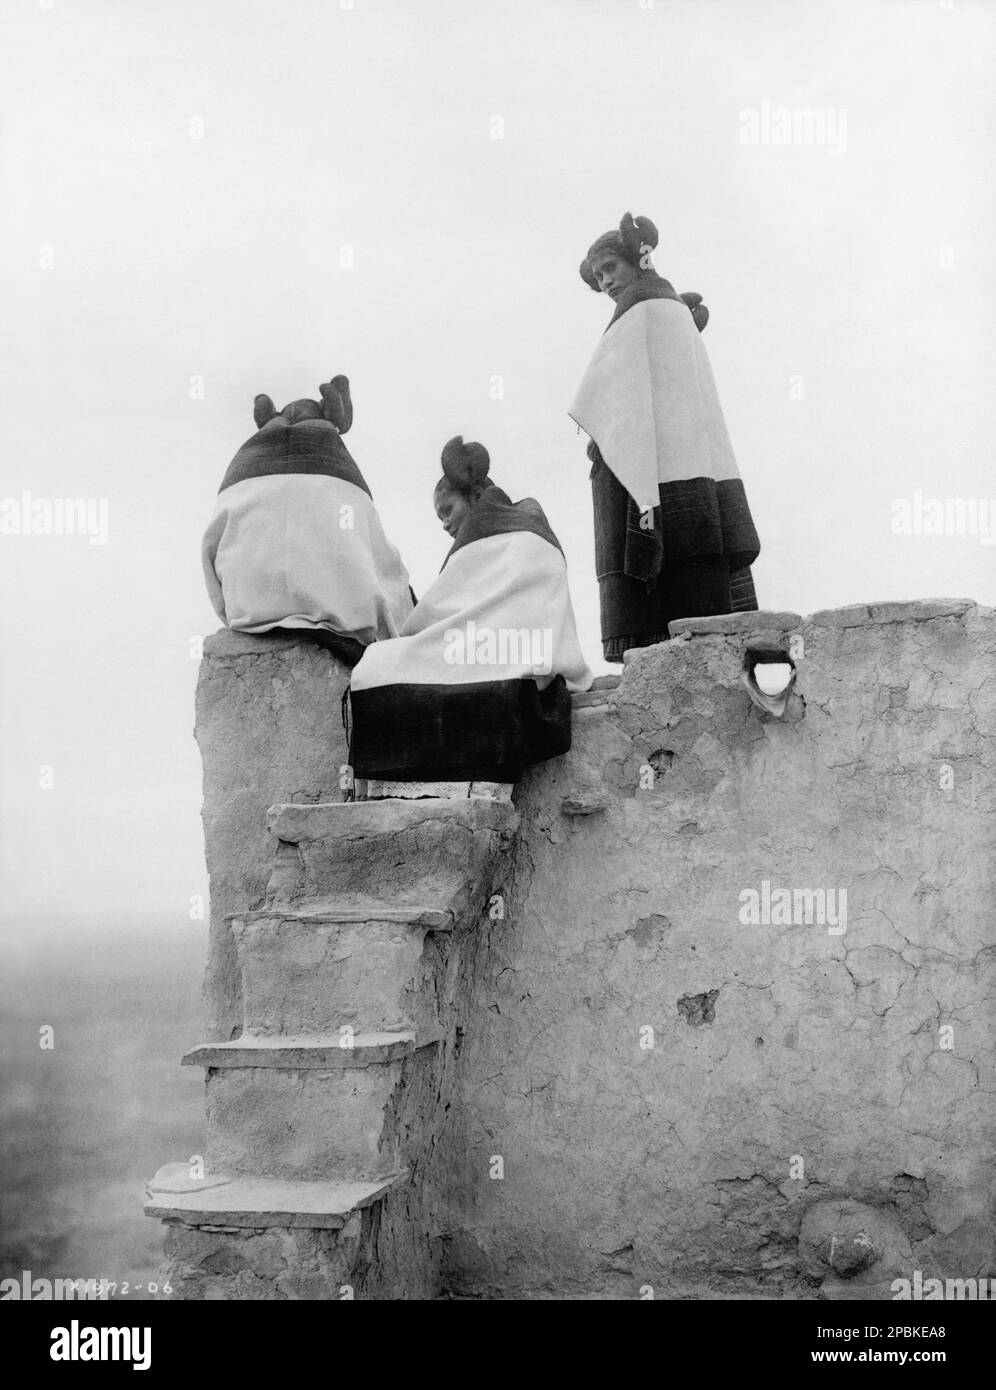 1906 , NEW MEXICO , USA : Three Hopi women at top of adobe steps, New Mexico . Photo by celebrated  american photographer  EDWARD S. CURTIS ( 1868 - 1952 )  - HISTORY - foto storiche - foto storica  - HOPI  Indians - INDIANI D' AMERICA - PELLEROSSA - natives americans  - Indians of North America -  WOMAN - WOMEN - DONNA - DONNE - chignon - mantle - mantello - poncho -  INDIANO - portrait - ritratto - pellerossa  - foto pittorialista - pictorialist photograph  -    ----  Archivio GBB Stock Photo